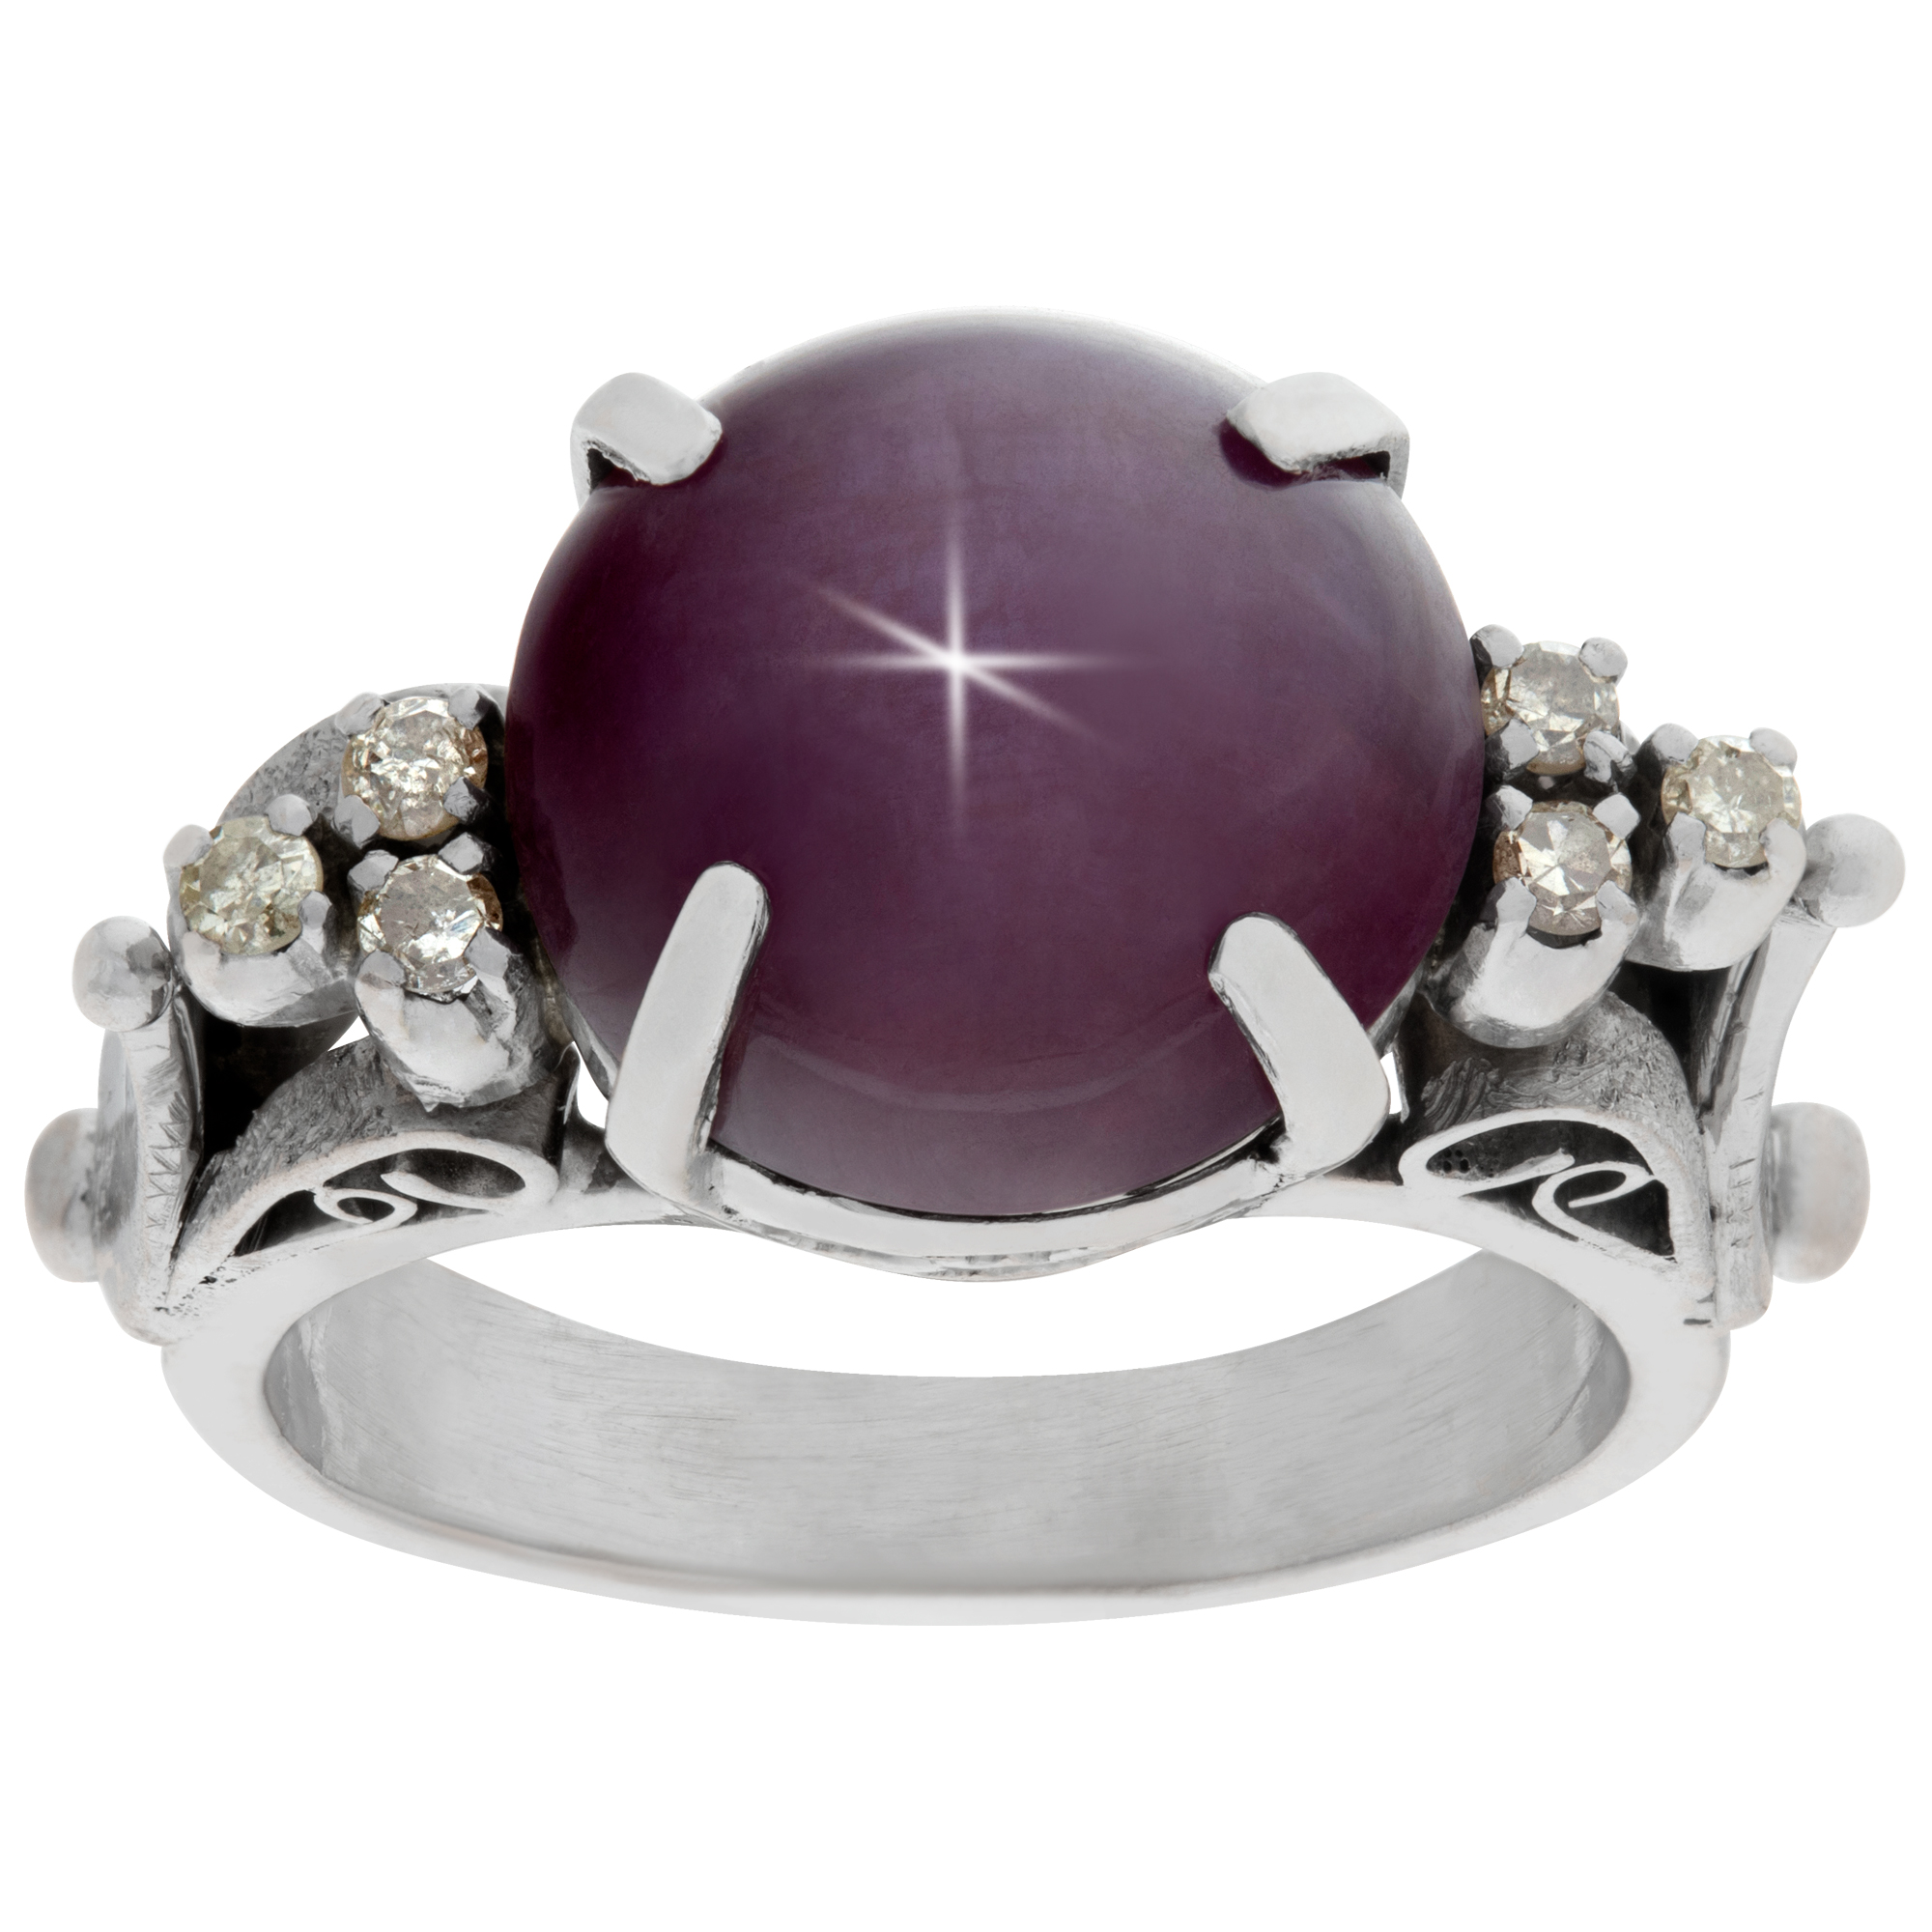 Ruby star sapphire ring in 14k white gold with diamond accents, approximate 4 carat star ruby image 1